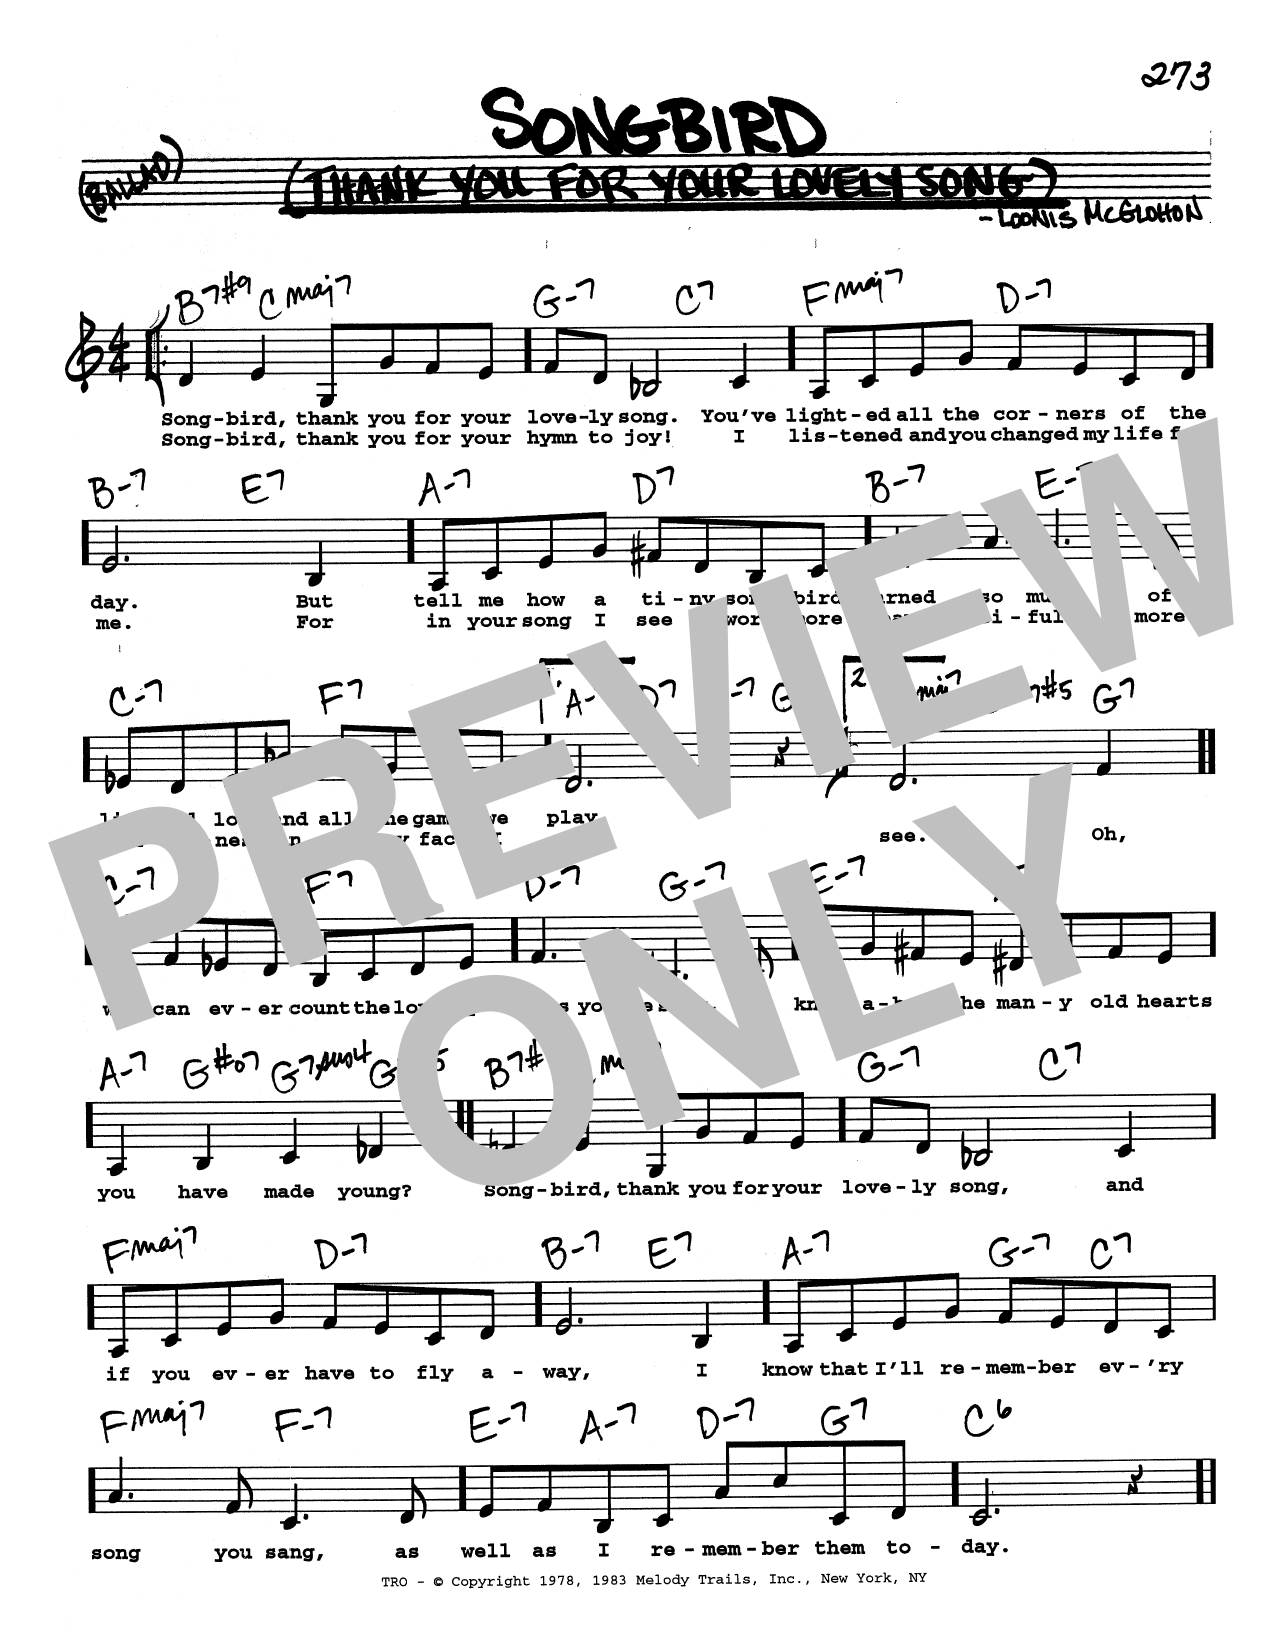 Loonis McGlohon Songbird (Thank You For Your Lovely Song) (Low Voice) sheet music notes printable PDF score